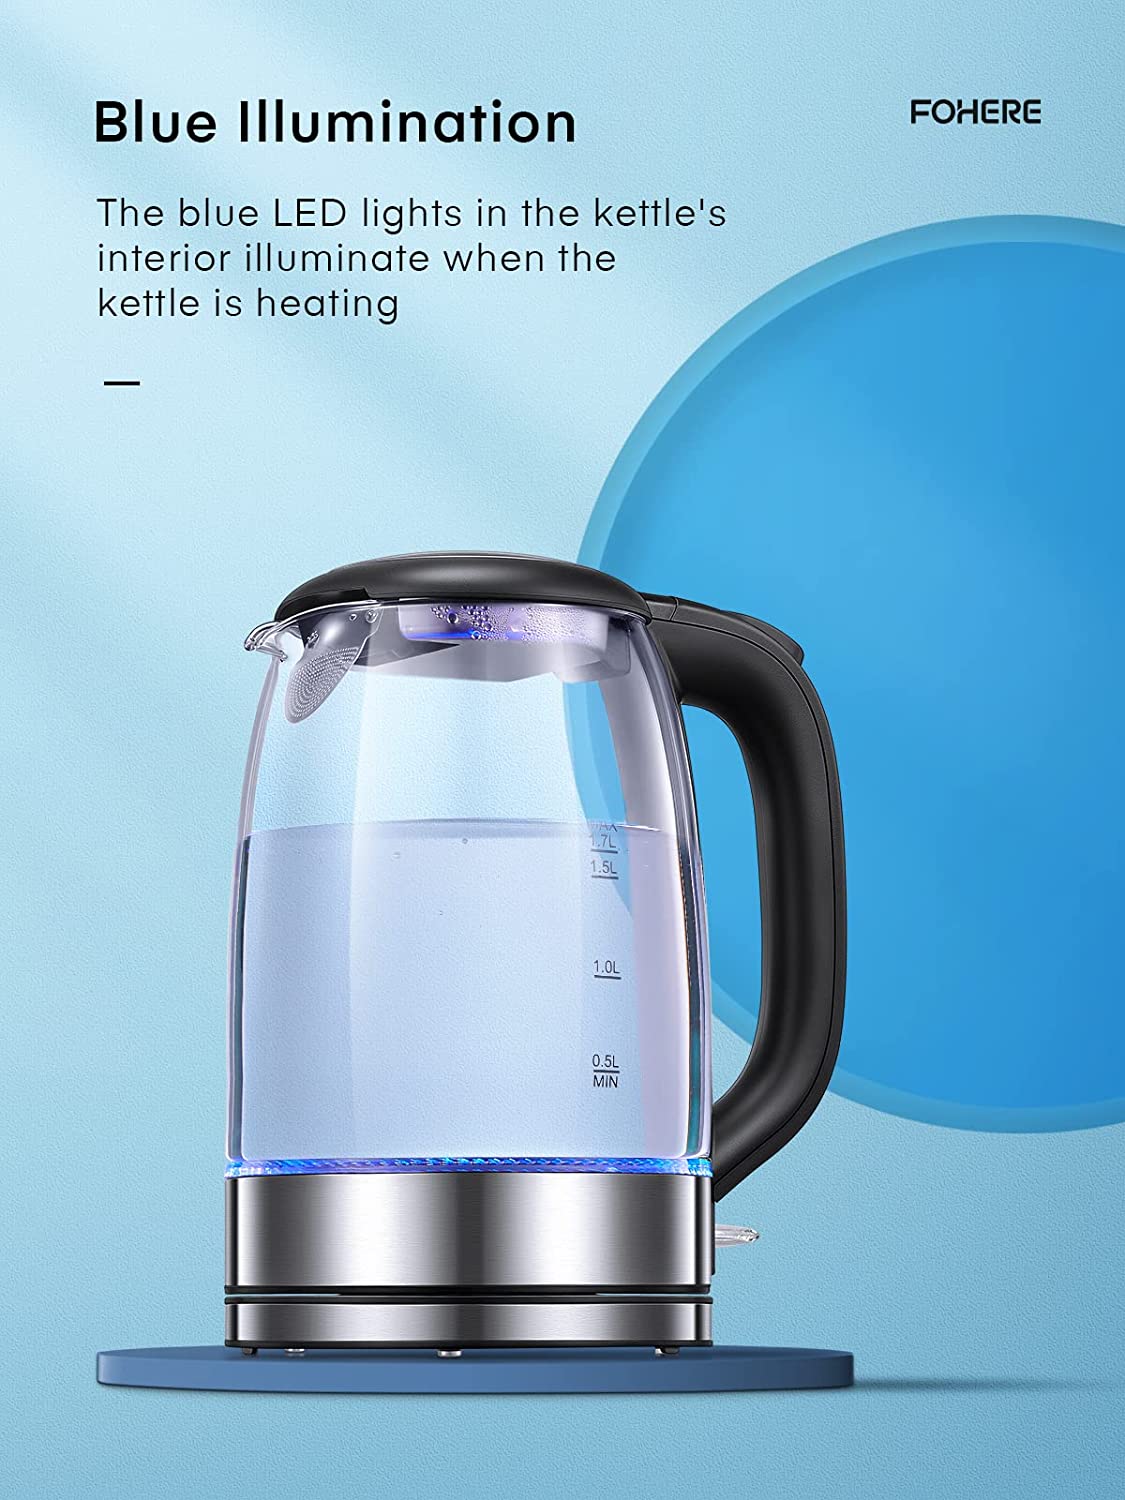 FOHERE Water Electric Kettle, 1.7L 1200W, Coffee & Tea Kettle Borosilicate Glass, Wide Opening, Auto Shut-Off, Cool Touch Handle, Base Detachable, LED Light. 360° Rotation, Boil Dry Protection